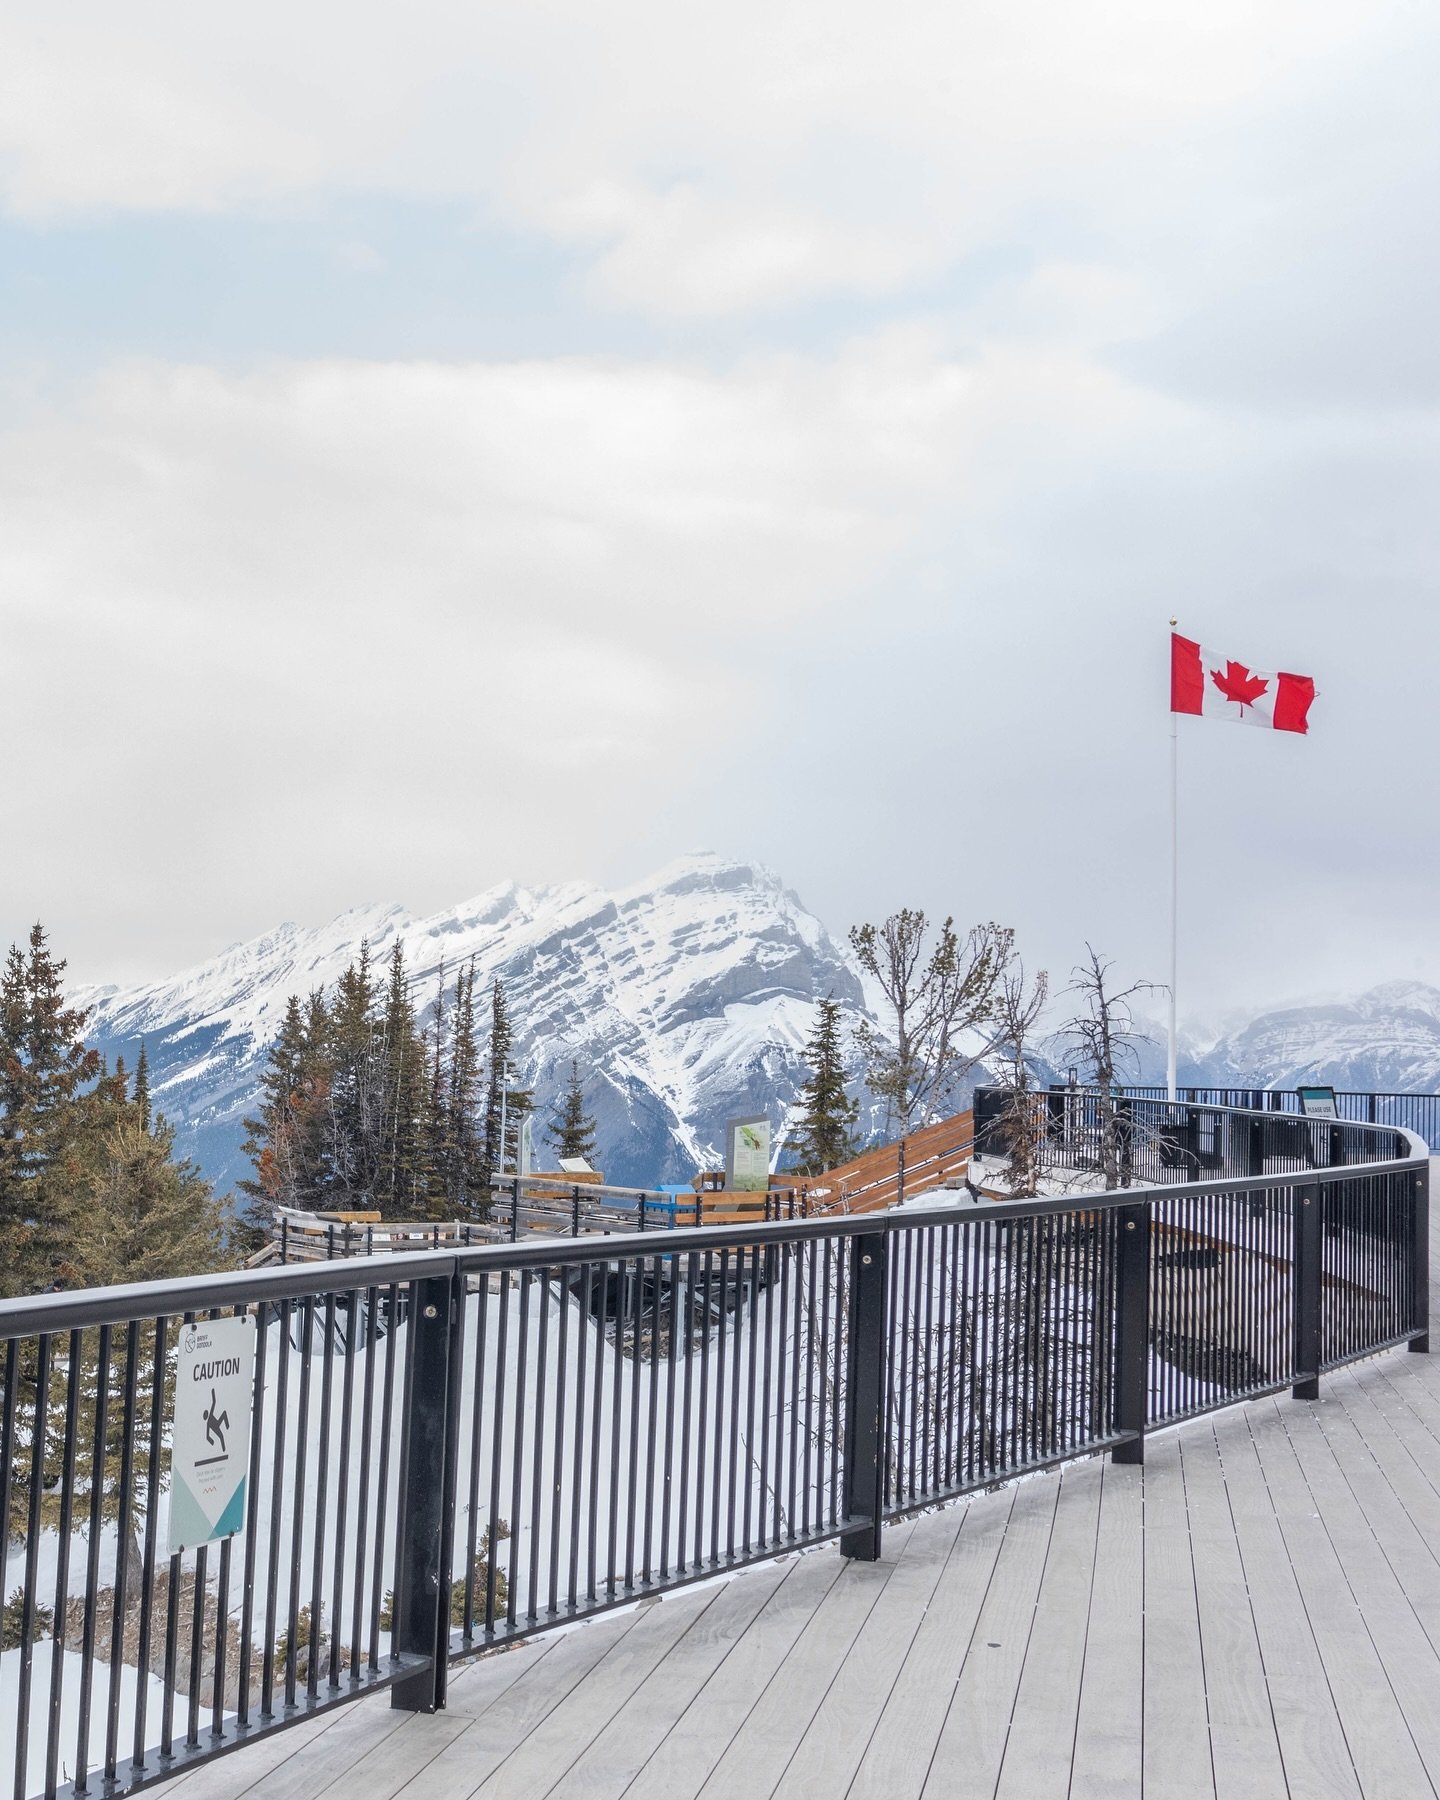 Sulphur Mountain viewpoint. This popular lookout point offers incredible views of the town of Banff and the surrounding area. This route follows the mostly paved and wooded boardwalk trails that start at the top of the Sulphur Mountain Gondola.